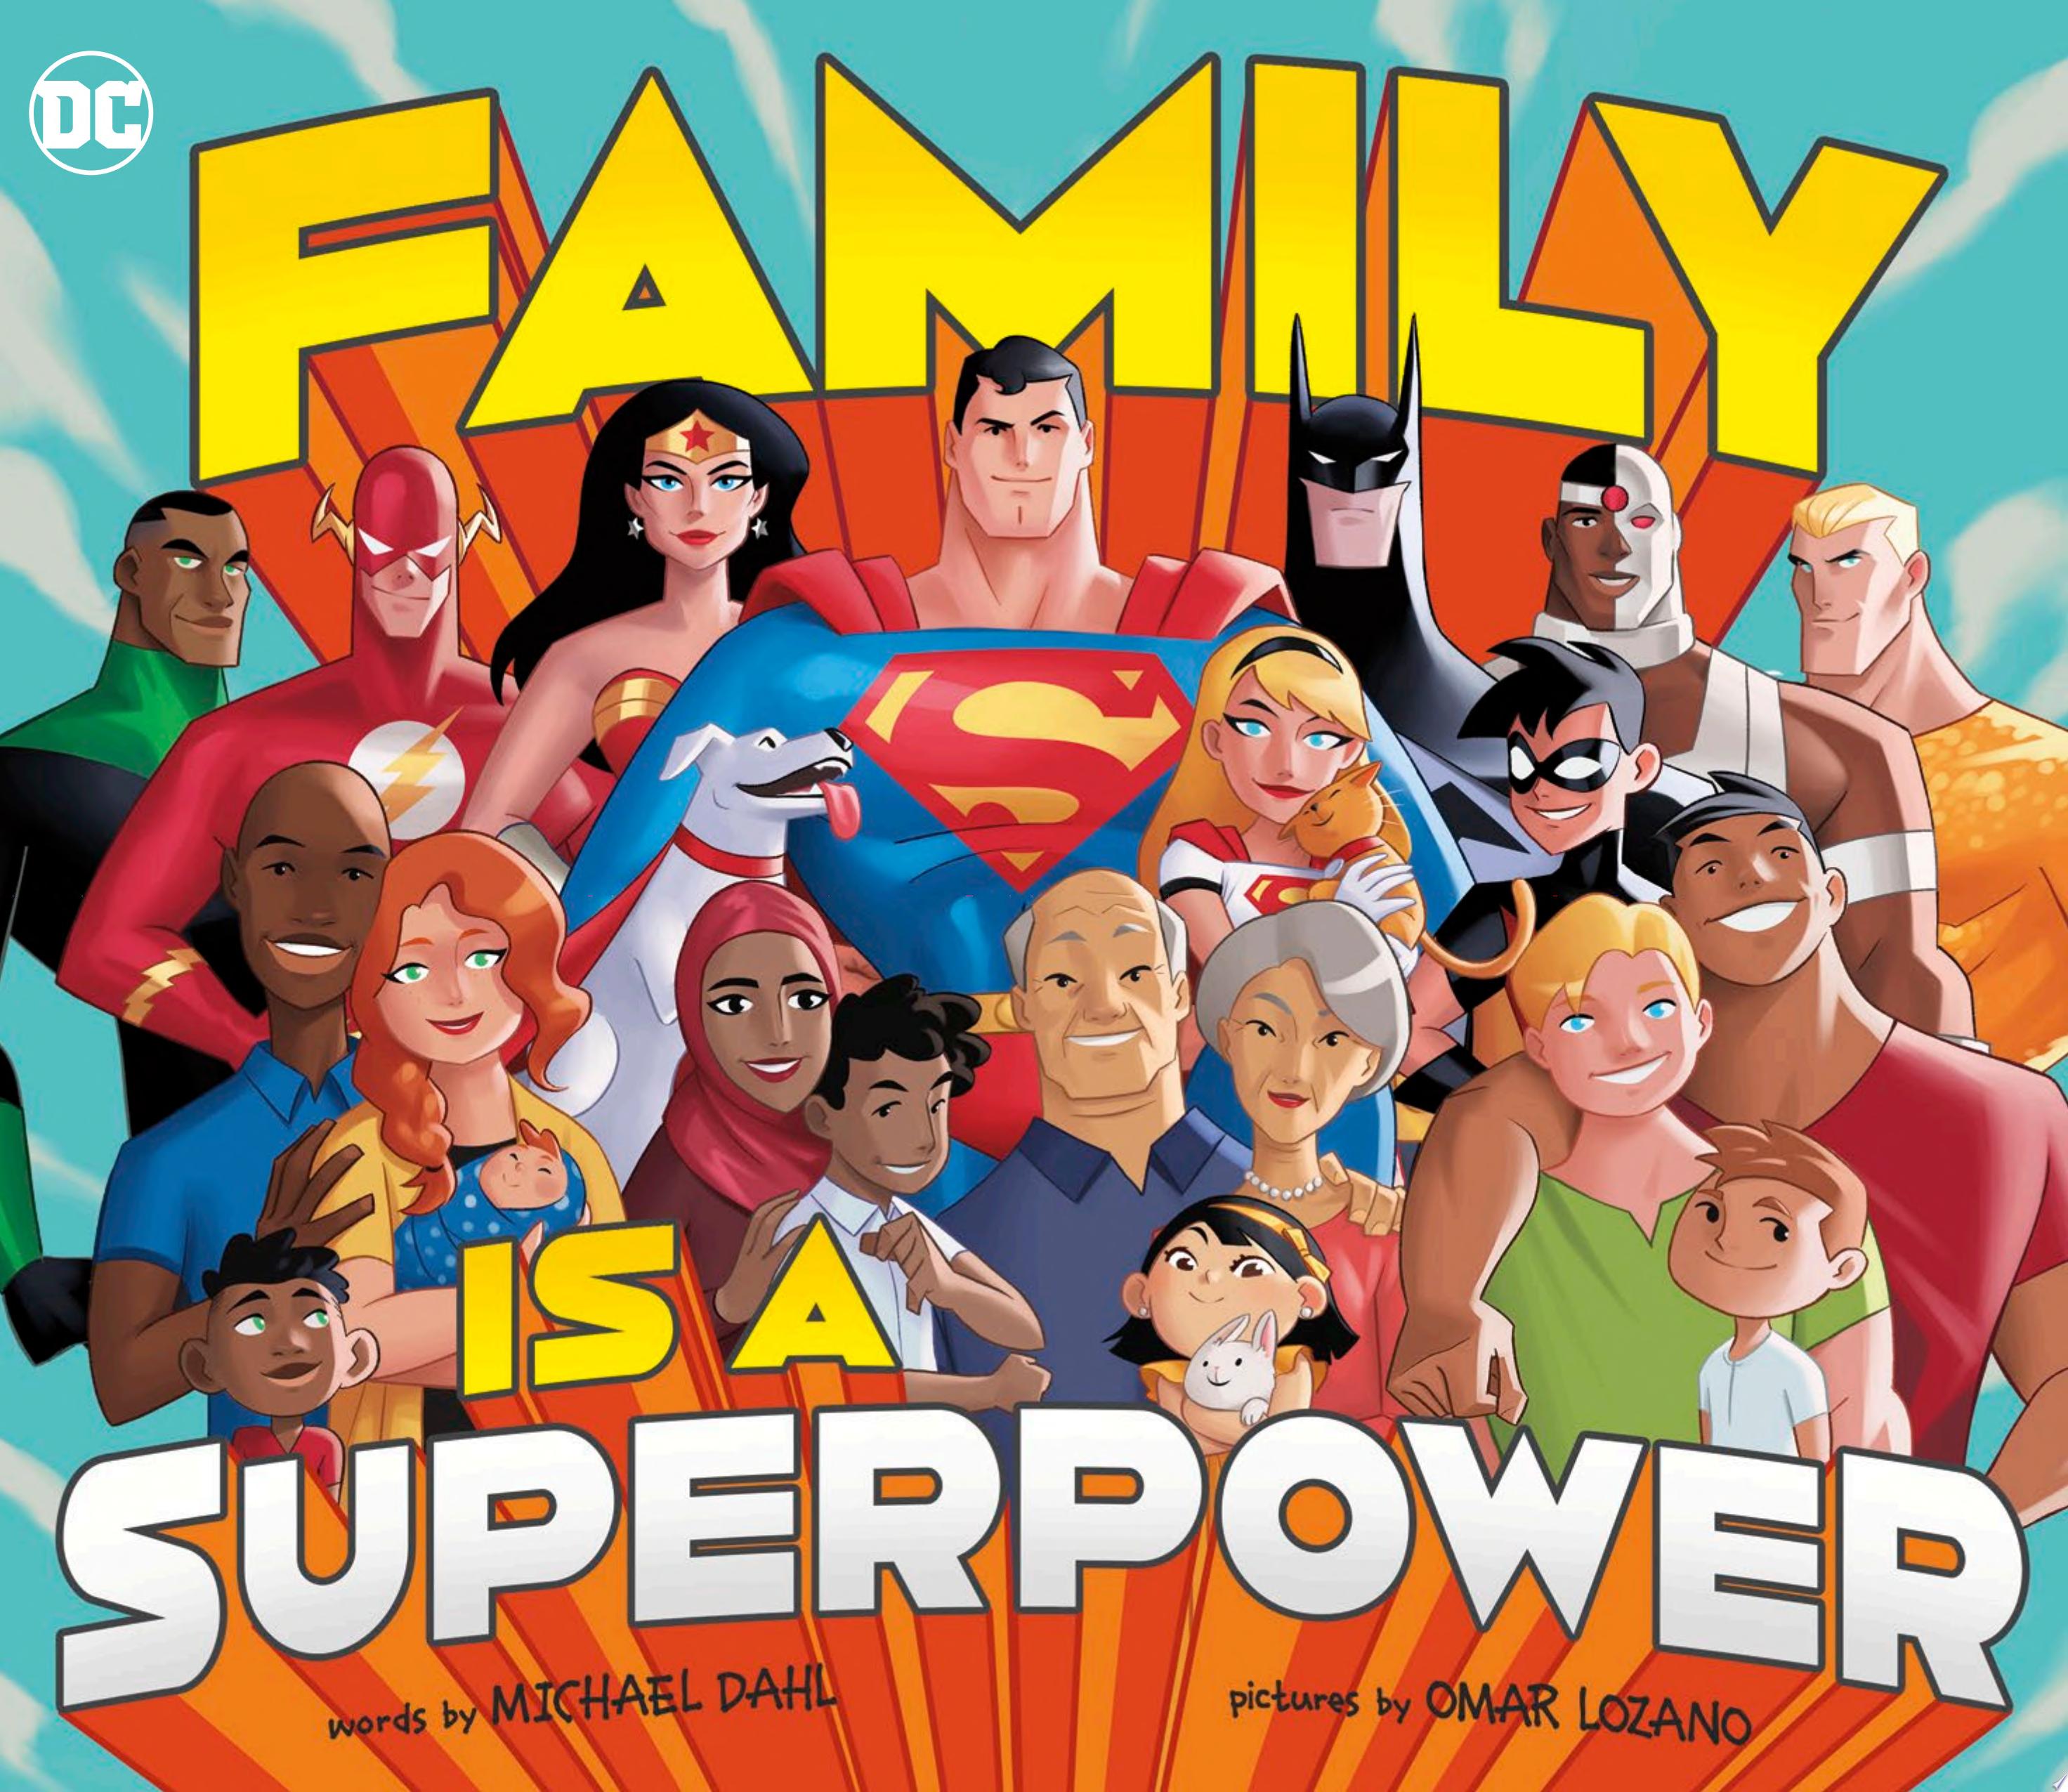 Image for "Family Is a Superpower"